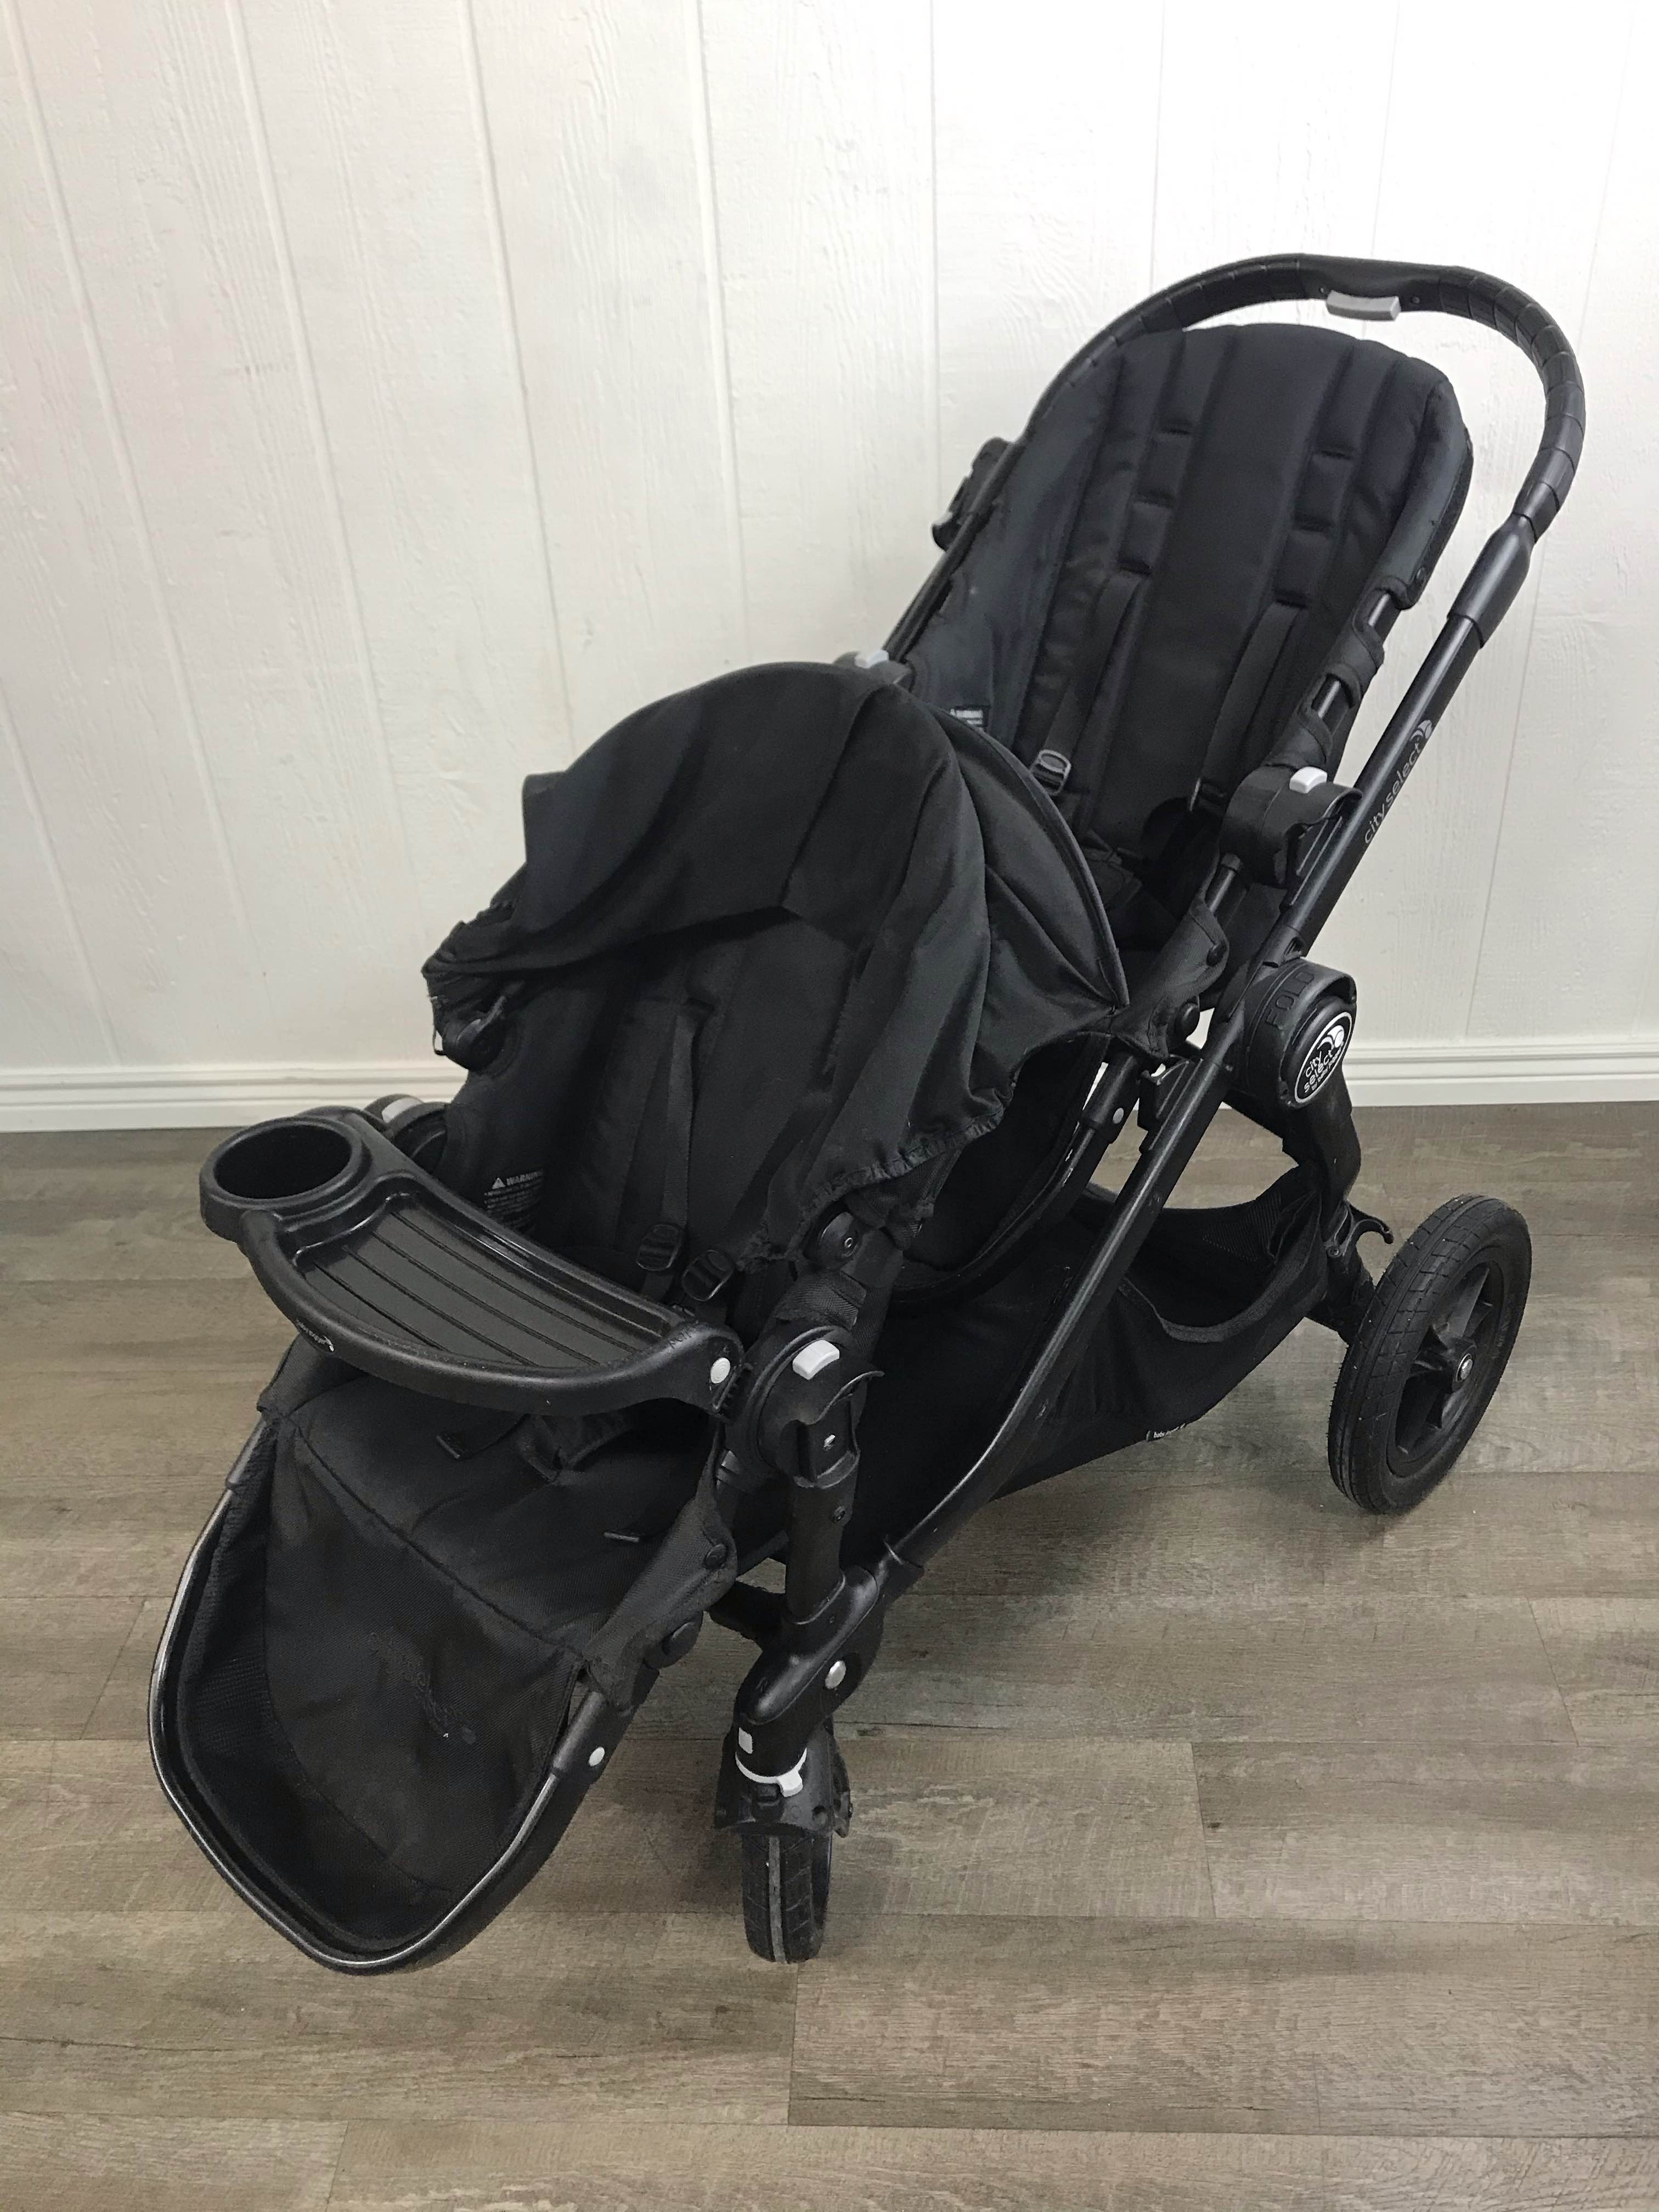 2015 city select double stroller